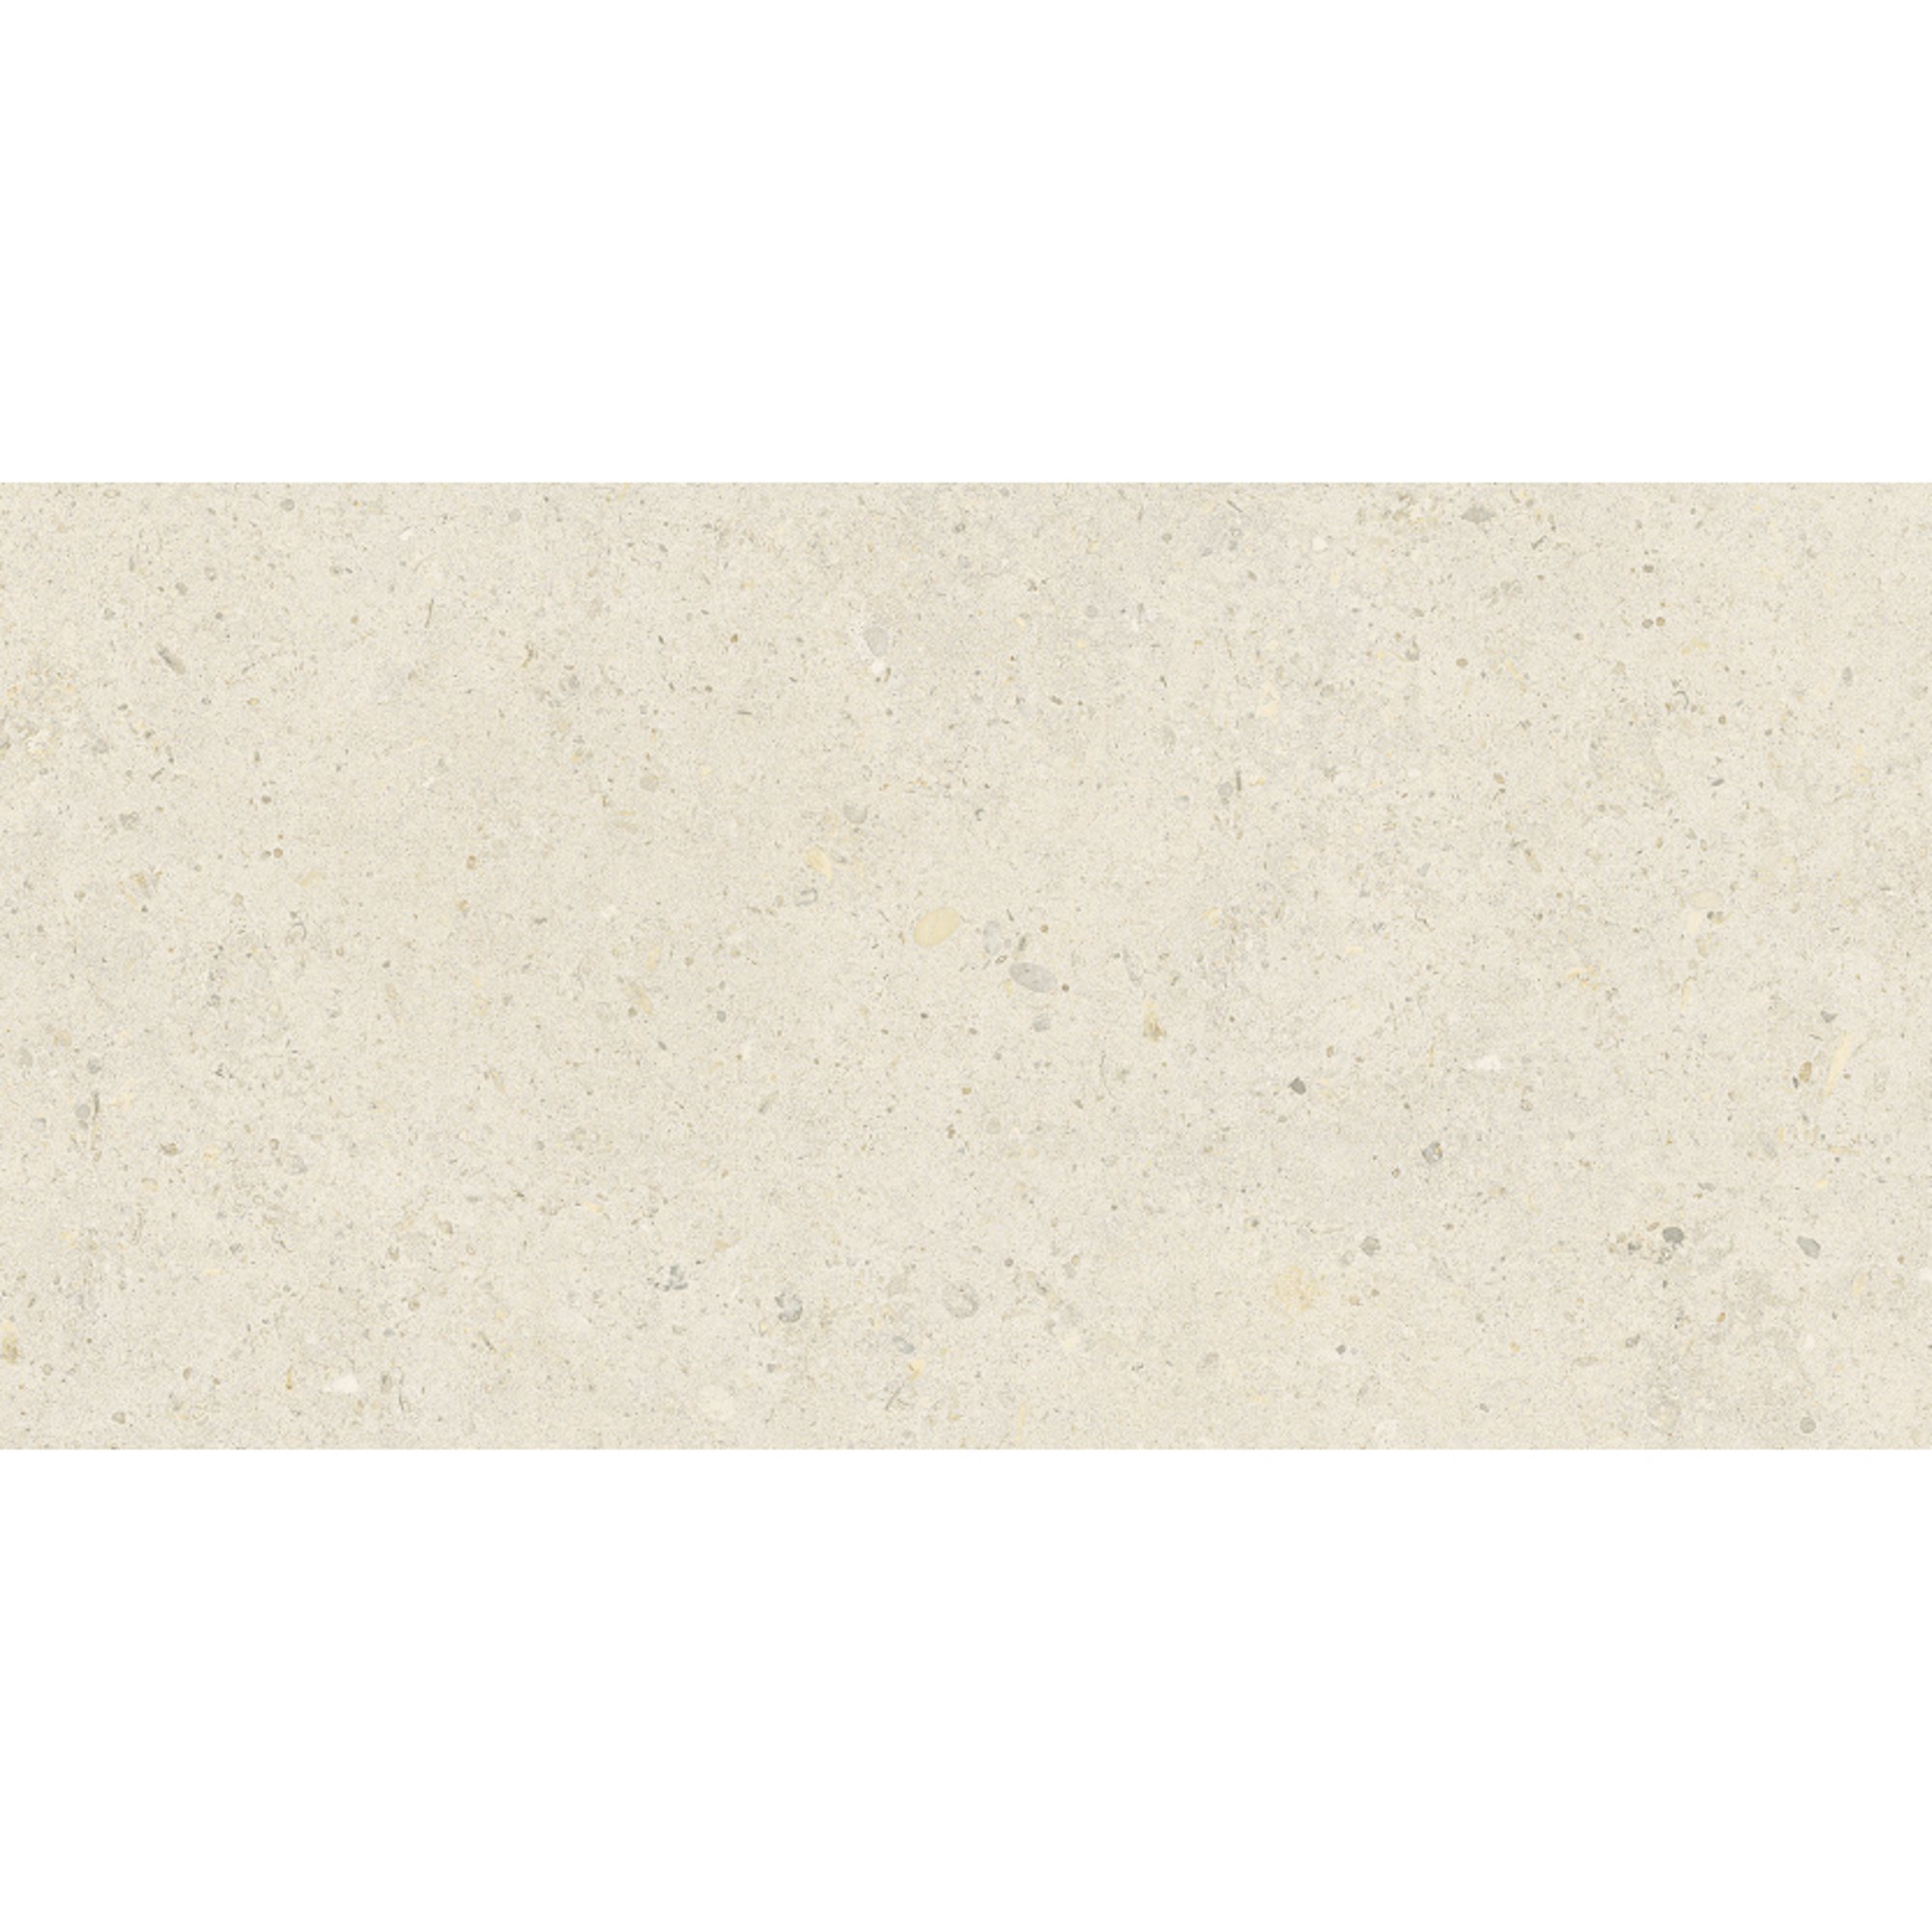 Coolstone White 600x300mm tile